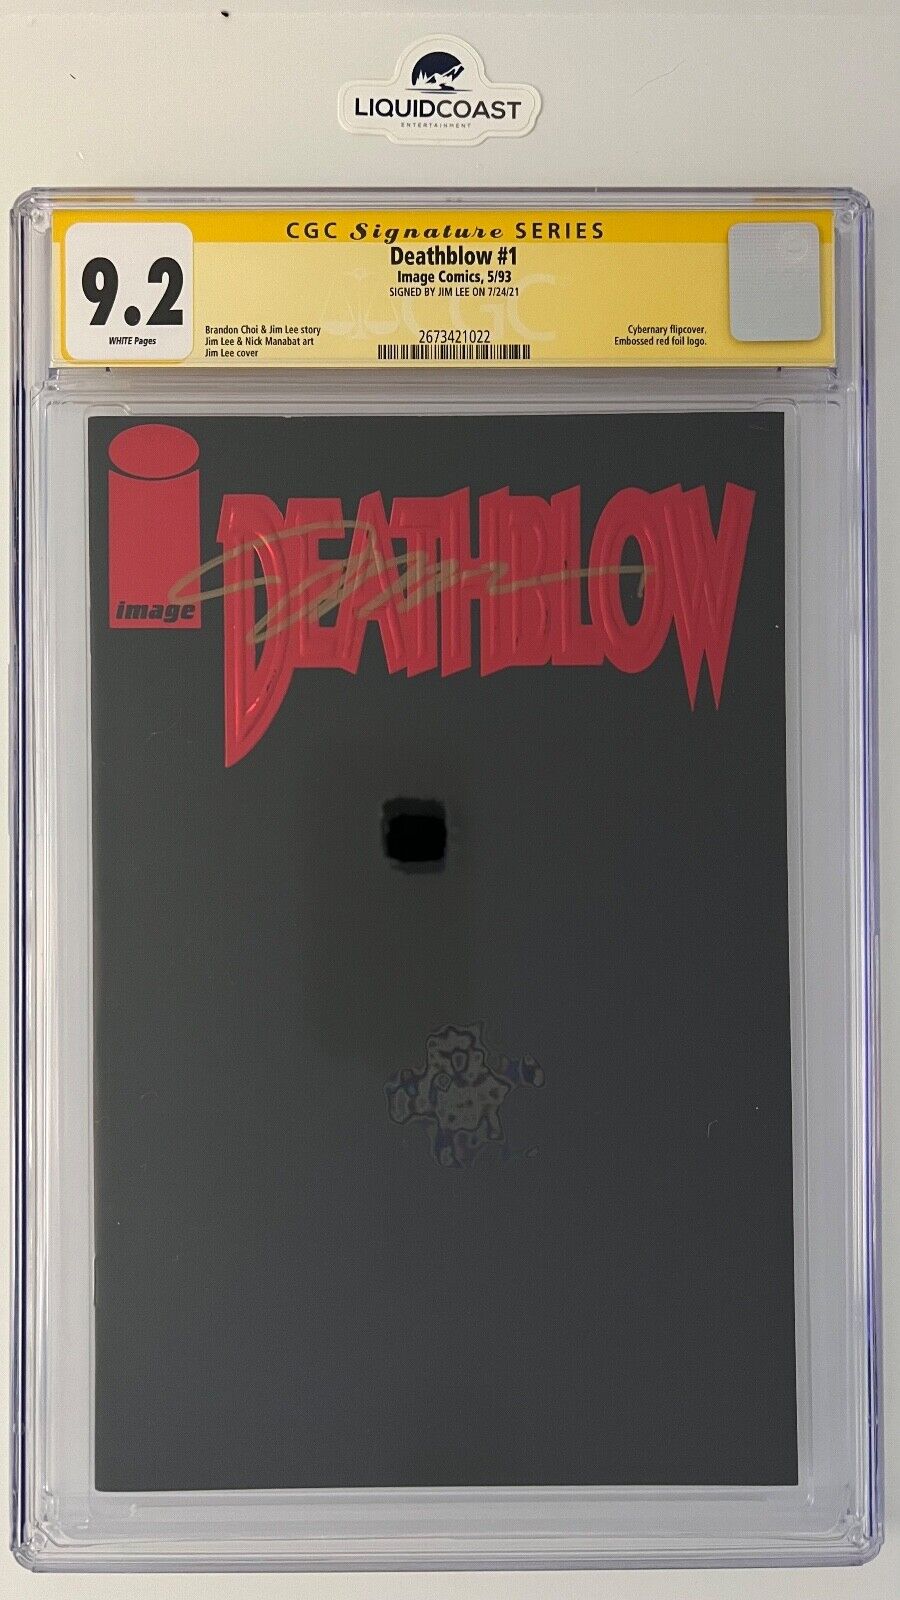 Deathblow #1 SS CGC 9.2 signed by Jim Lee